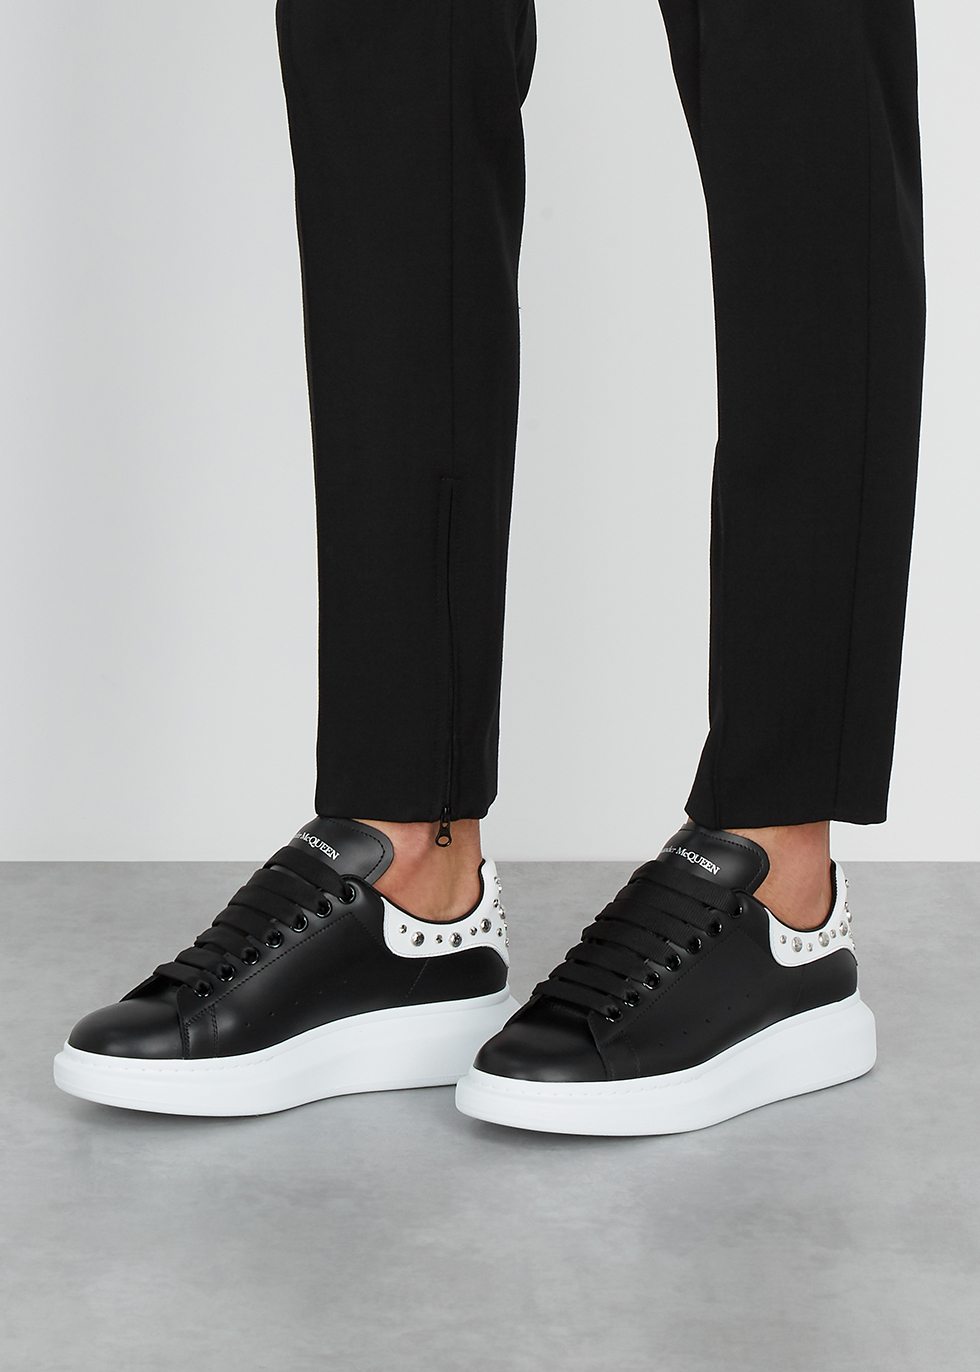 alexander mcqueen trainers black and 